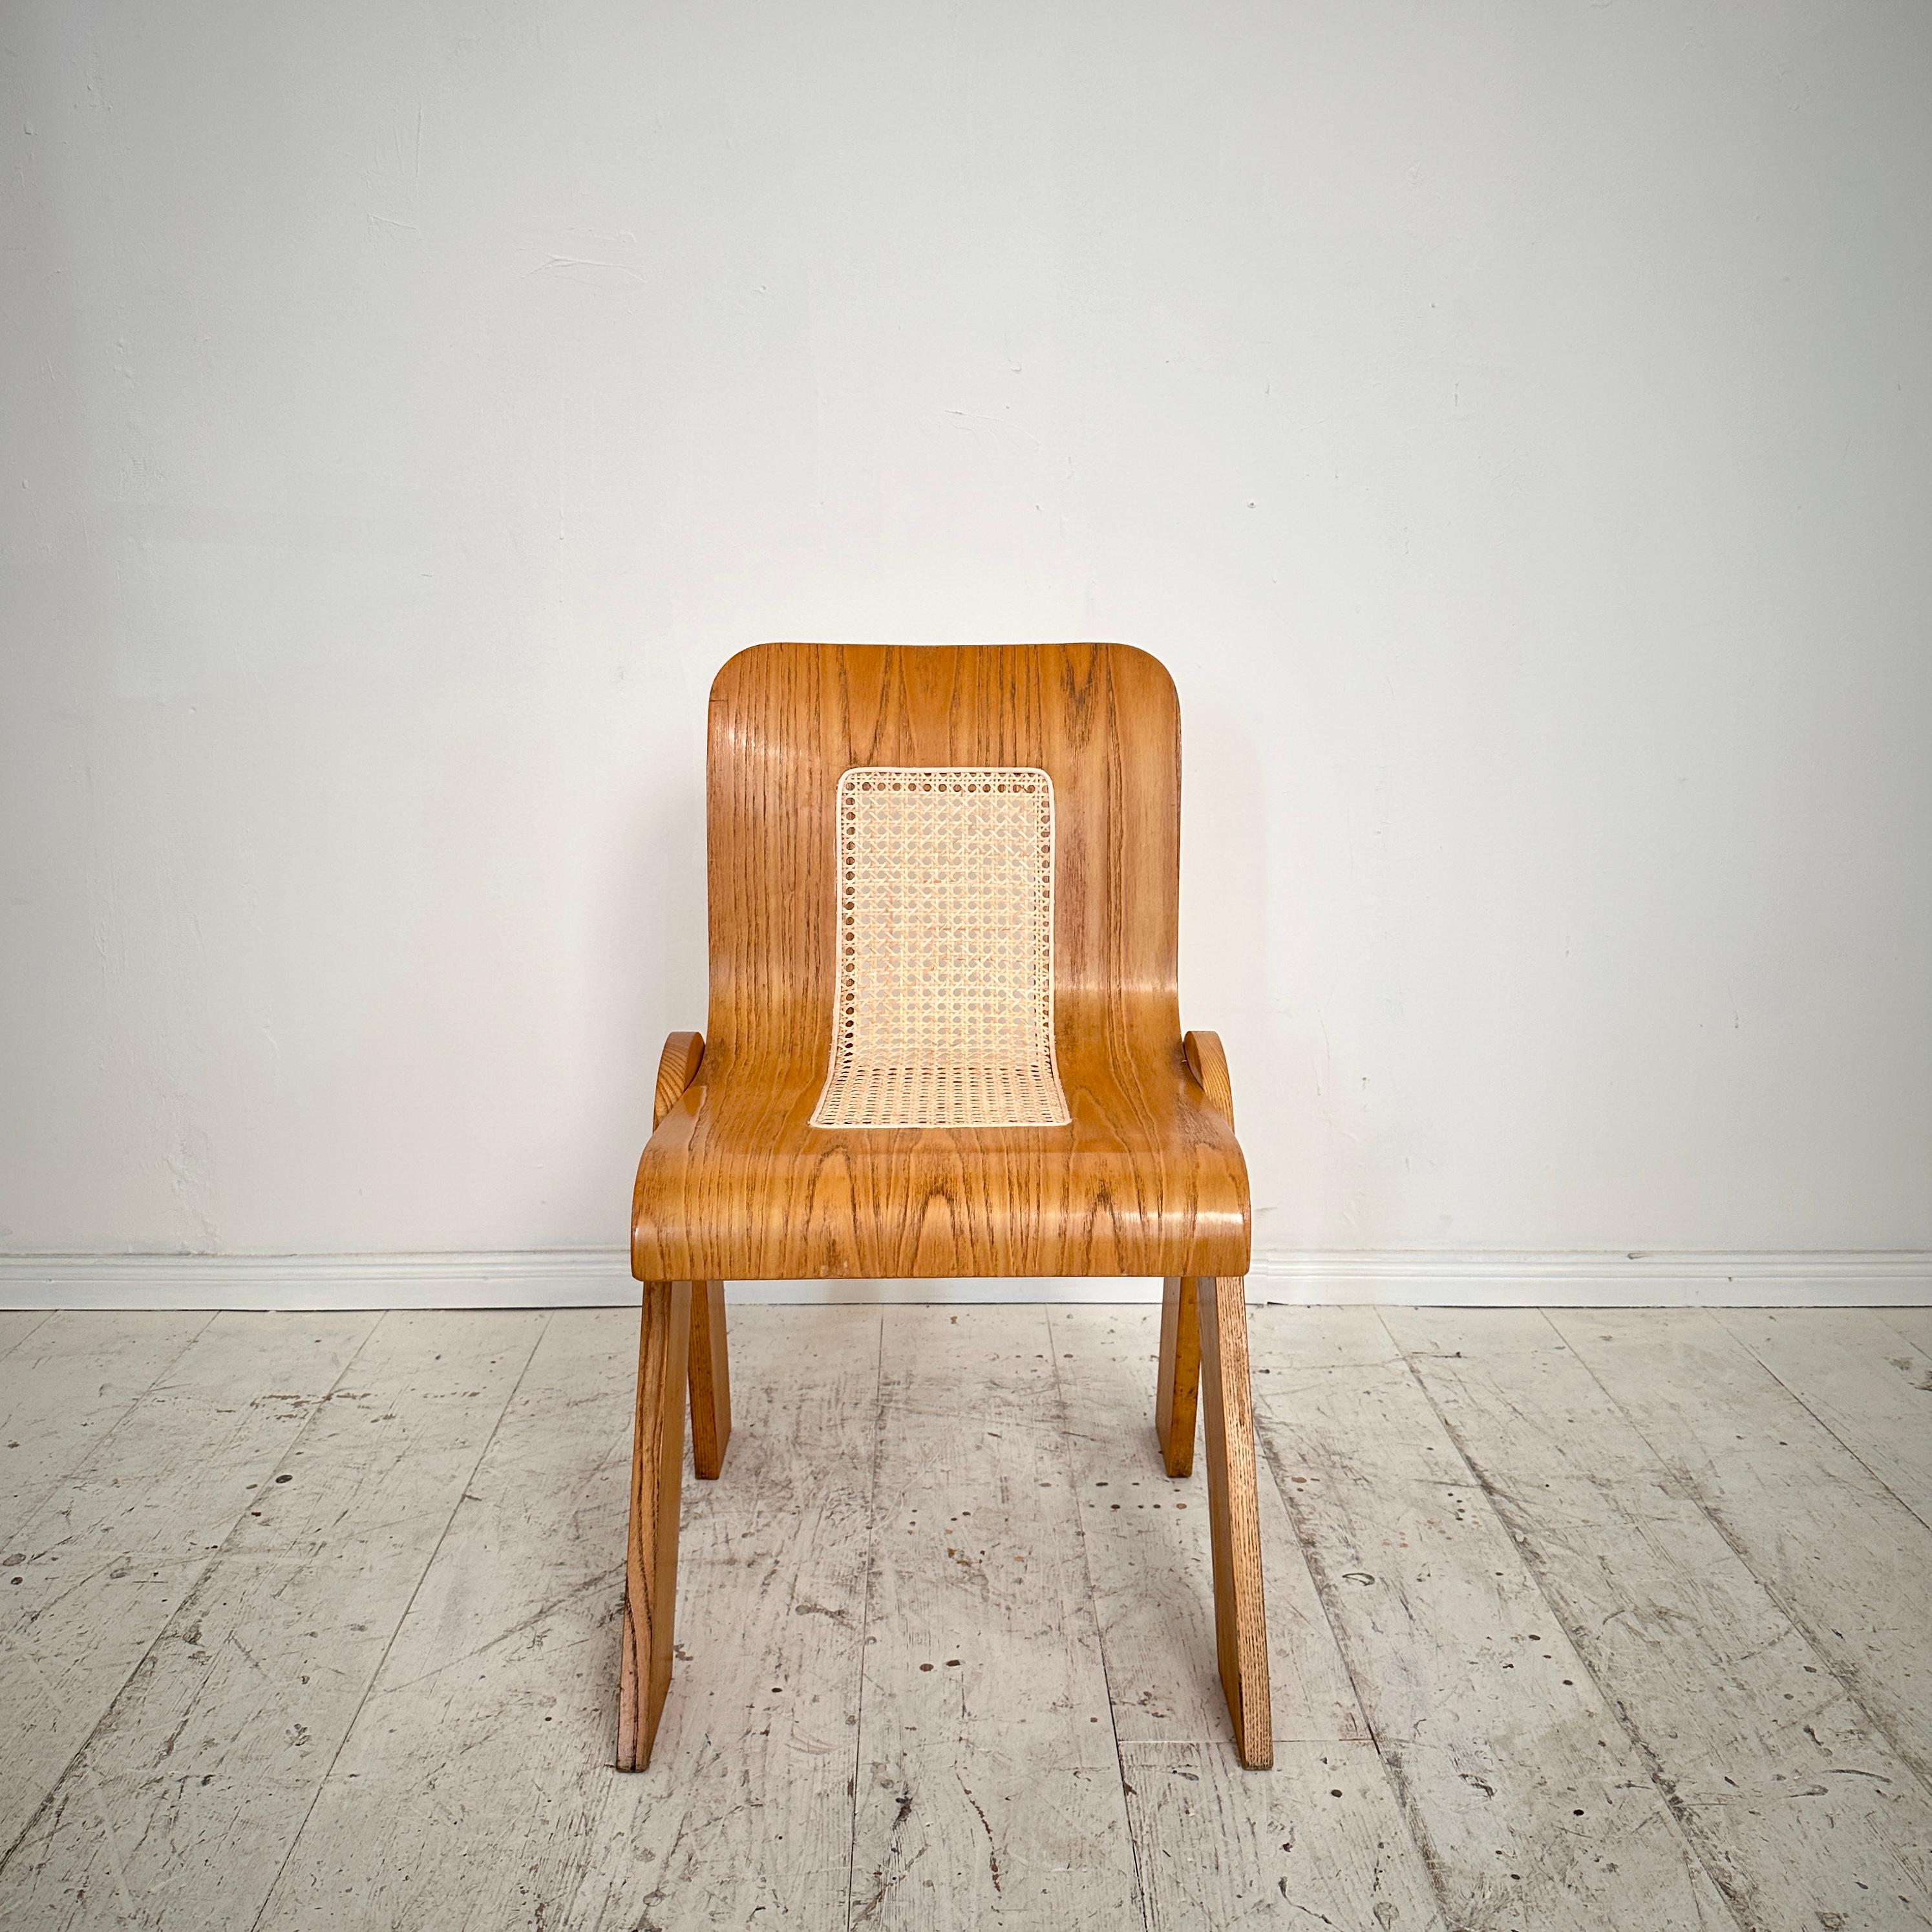 Step into the epitome of mid-century Italian design with this exquisite dining chair by Gigi Sabadin for Stilwood, circa 1970. Crafted from ash wood and adorned with delicate cane detailing, this chair epitomizes the era's commitment to sleek lines